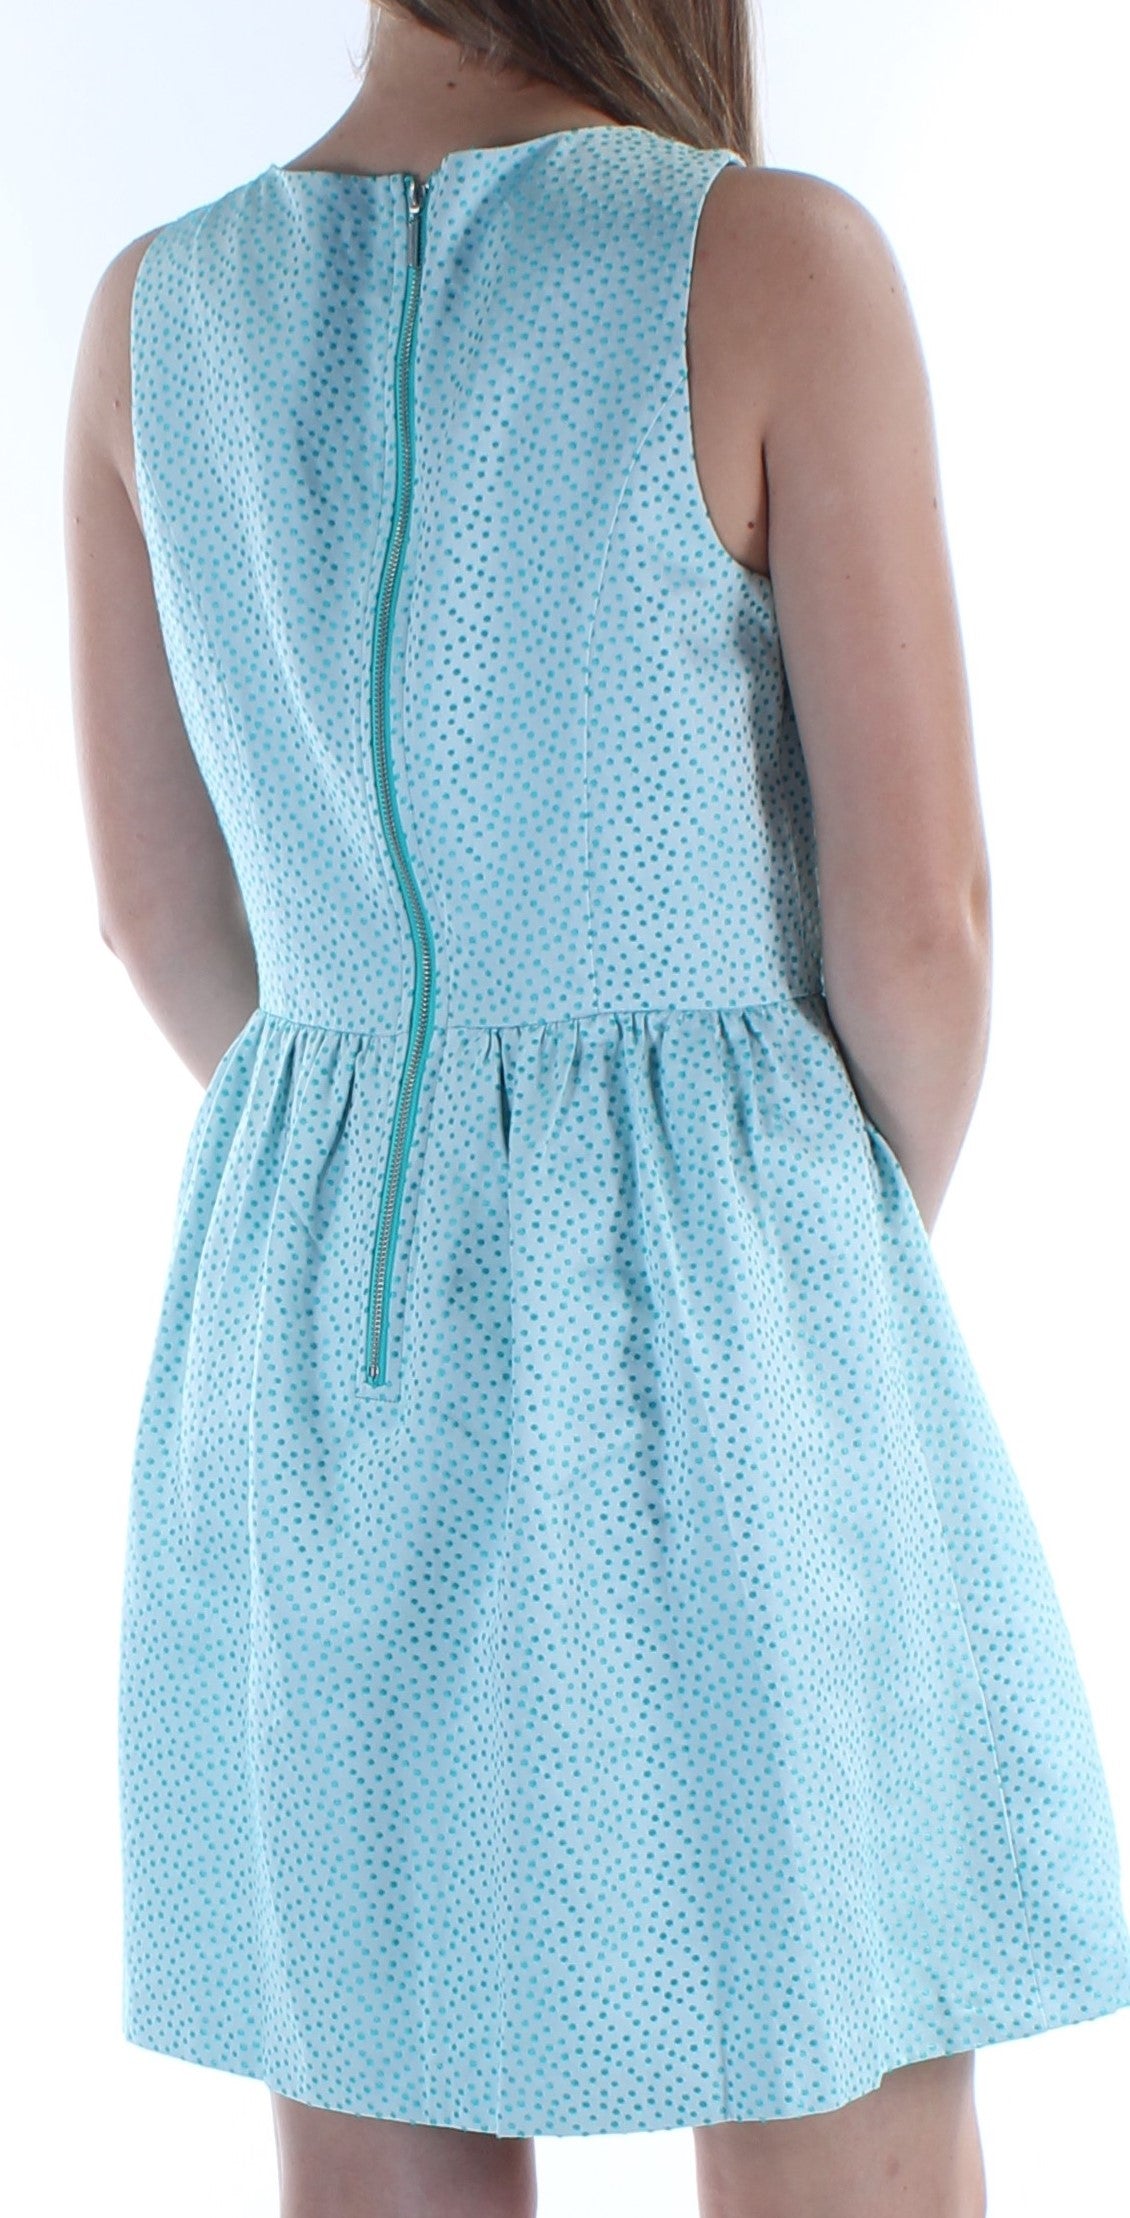 KENSIE Womens Light Blue Cut Out  Embroidered Polka Dot Sleeveless Jewel Neck Above The Knee Dress